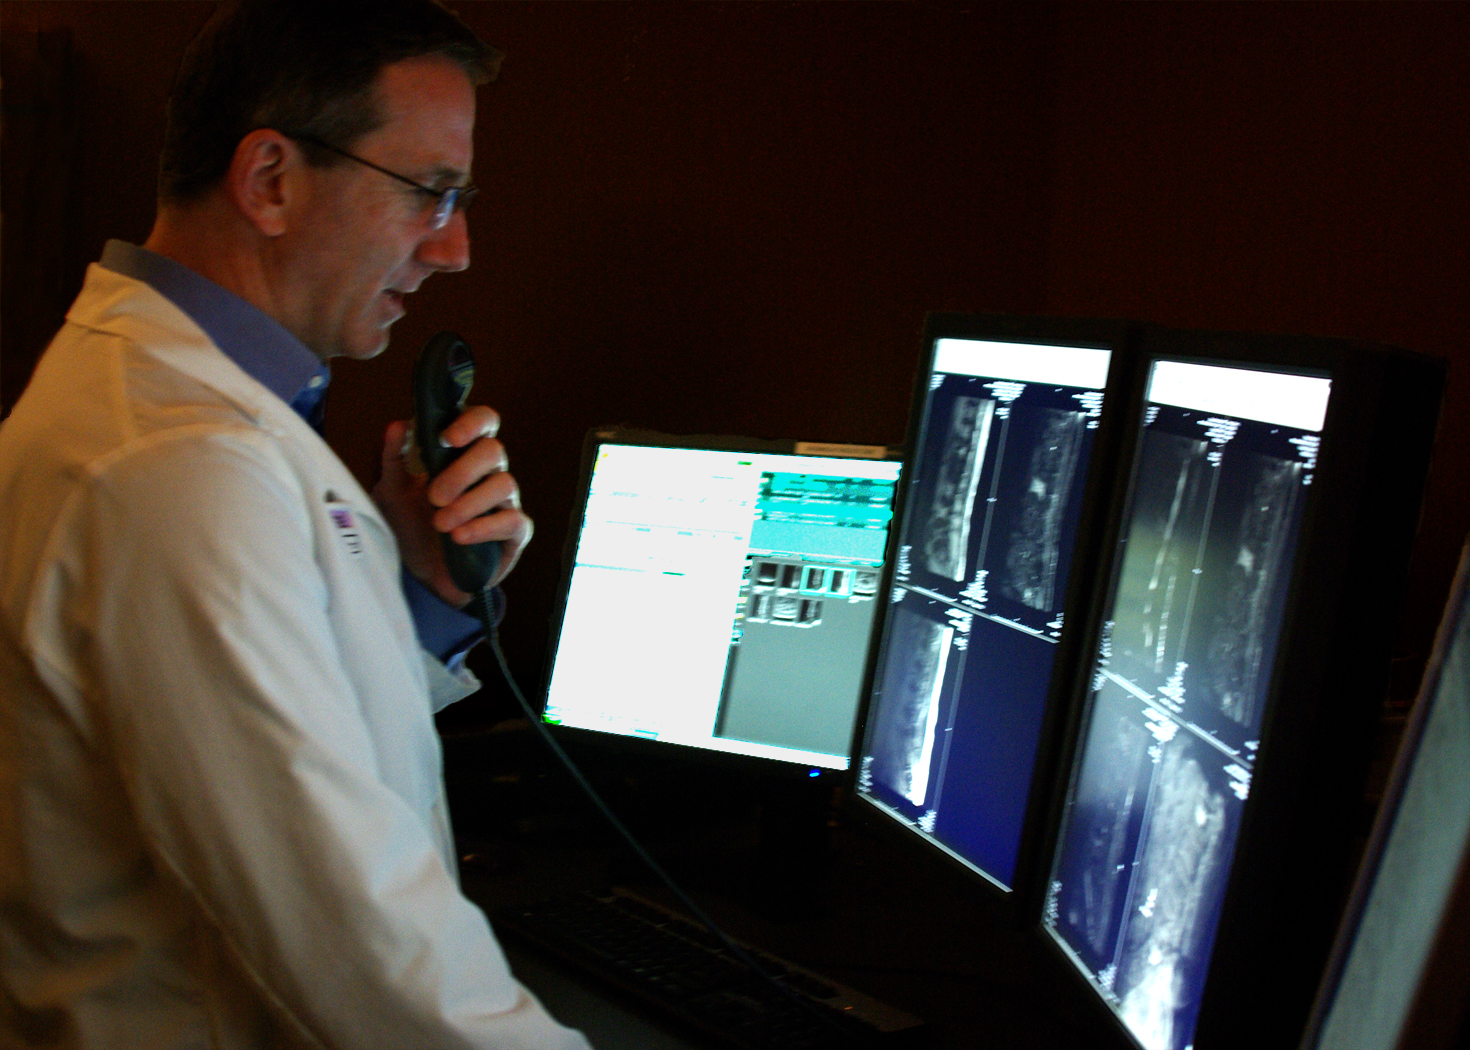 A radiologist looking at scans